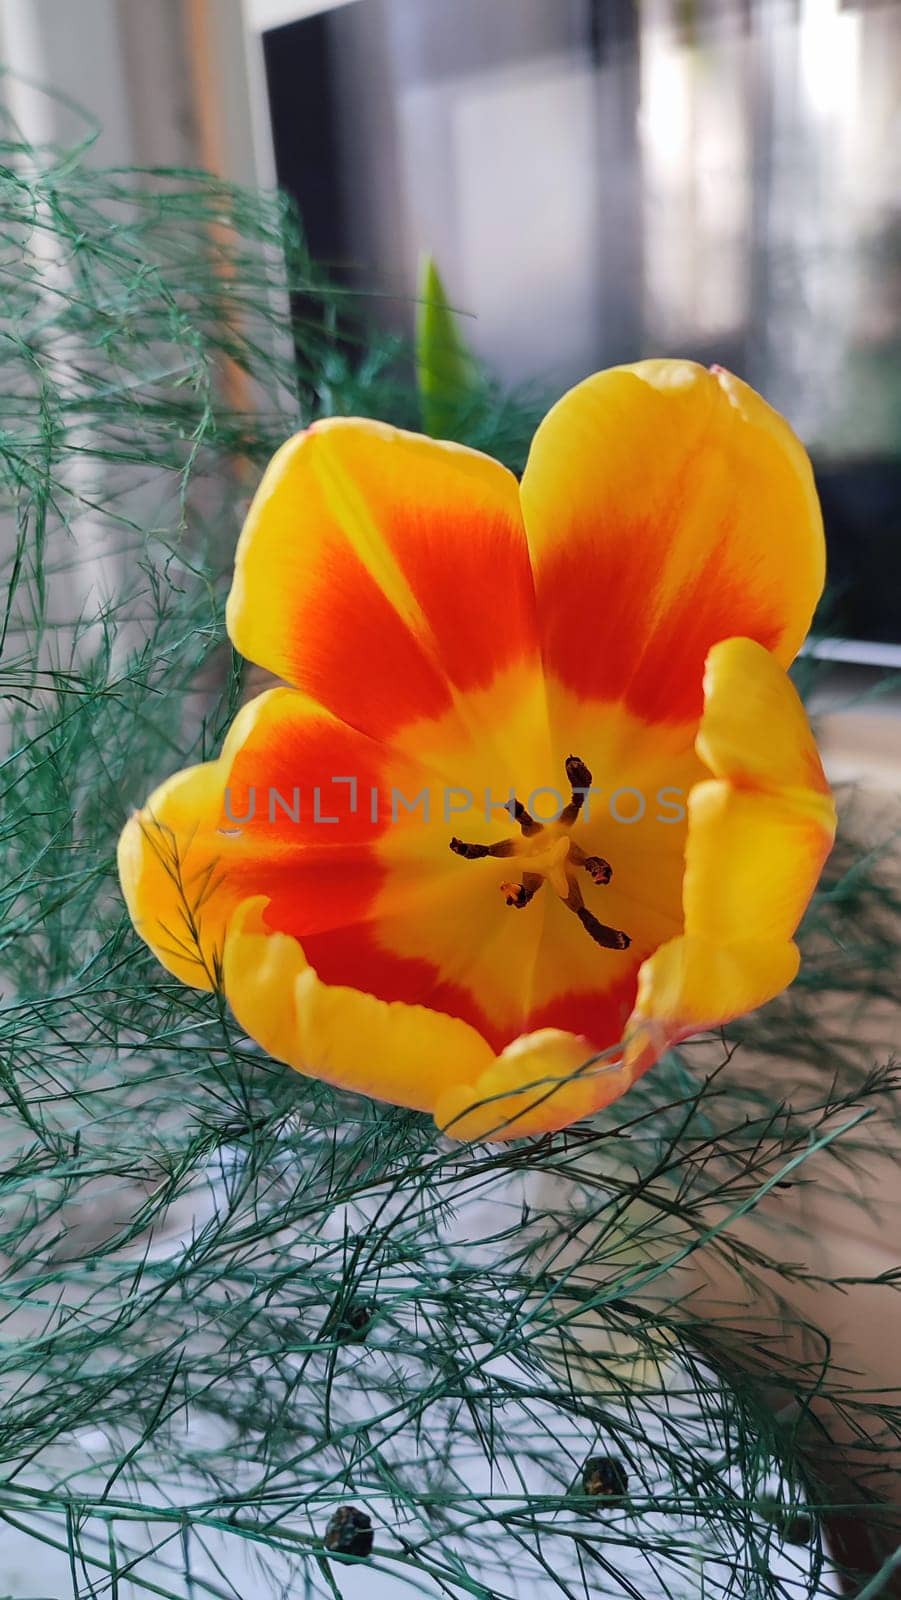 beautiful tulip flower, orange yellow color, green leaves, nature by Ply